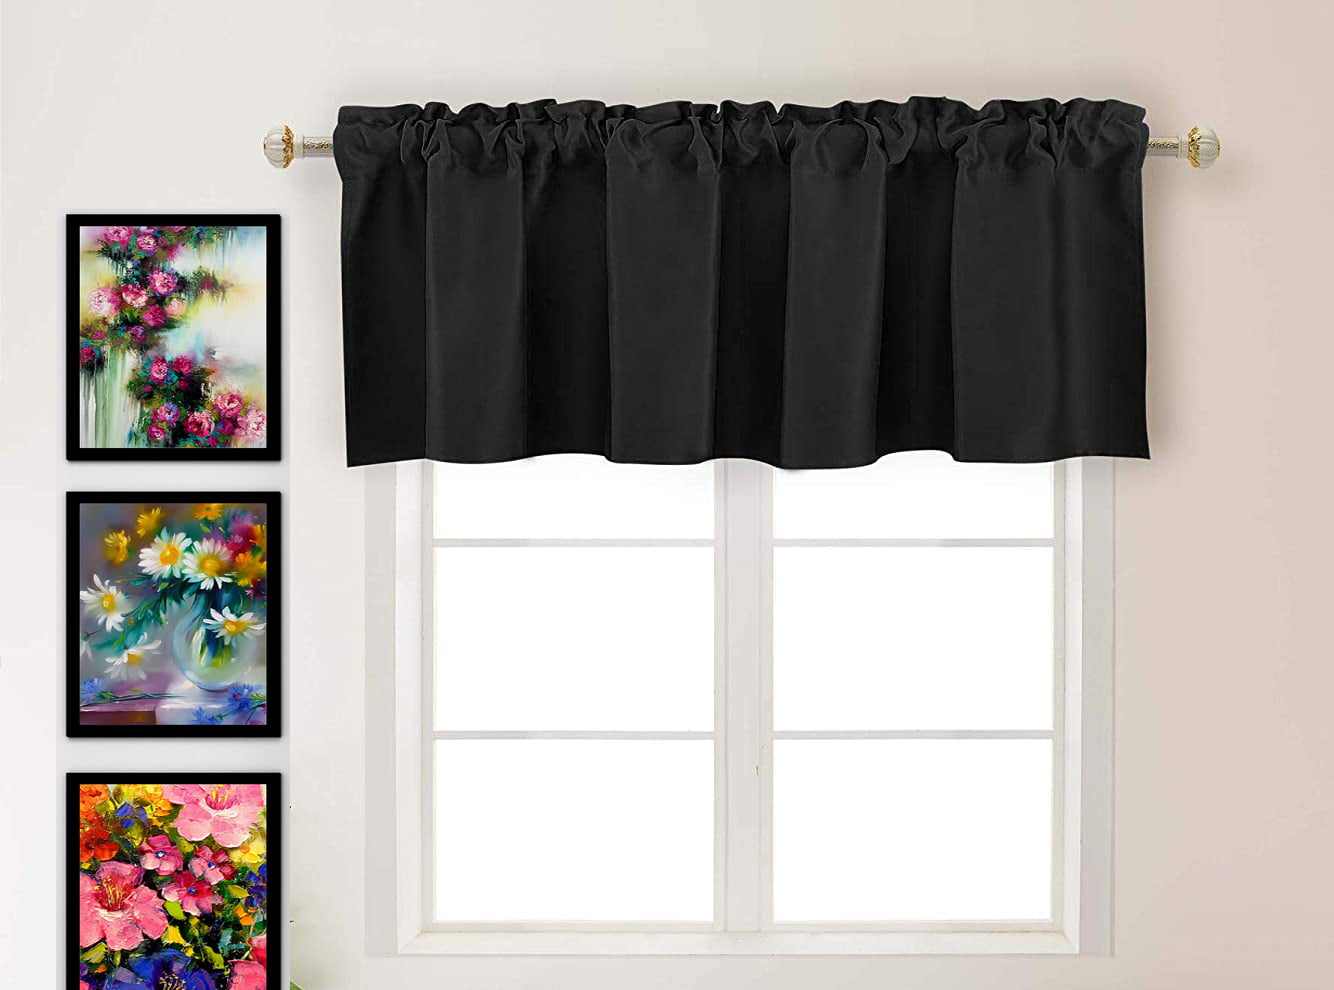 Black Blackout Valances for Windows Treatment 18 Inch Length Solid Thermal Insulated Rod Pocket Top for Bedroom Kitchen and Bathroom Curtains Valance for Small Windows 1 Panel 42X18 Inch Black